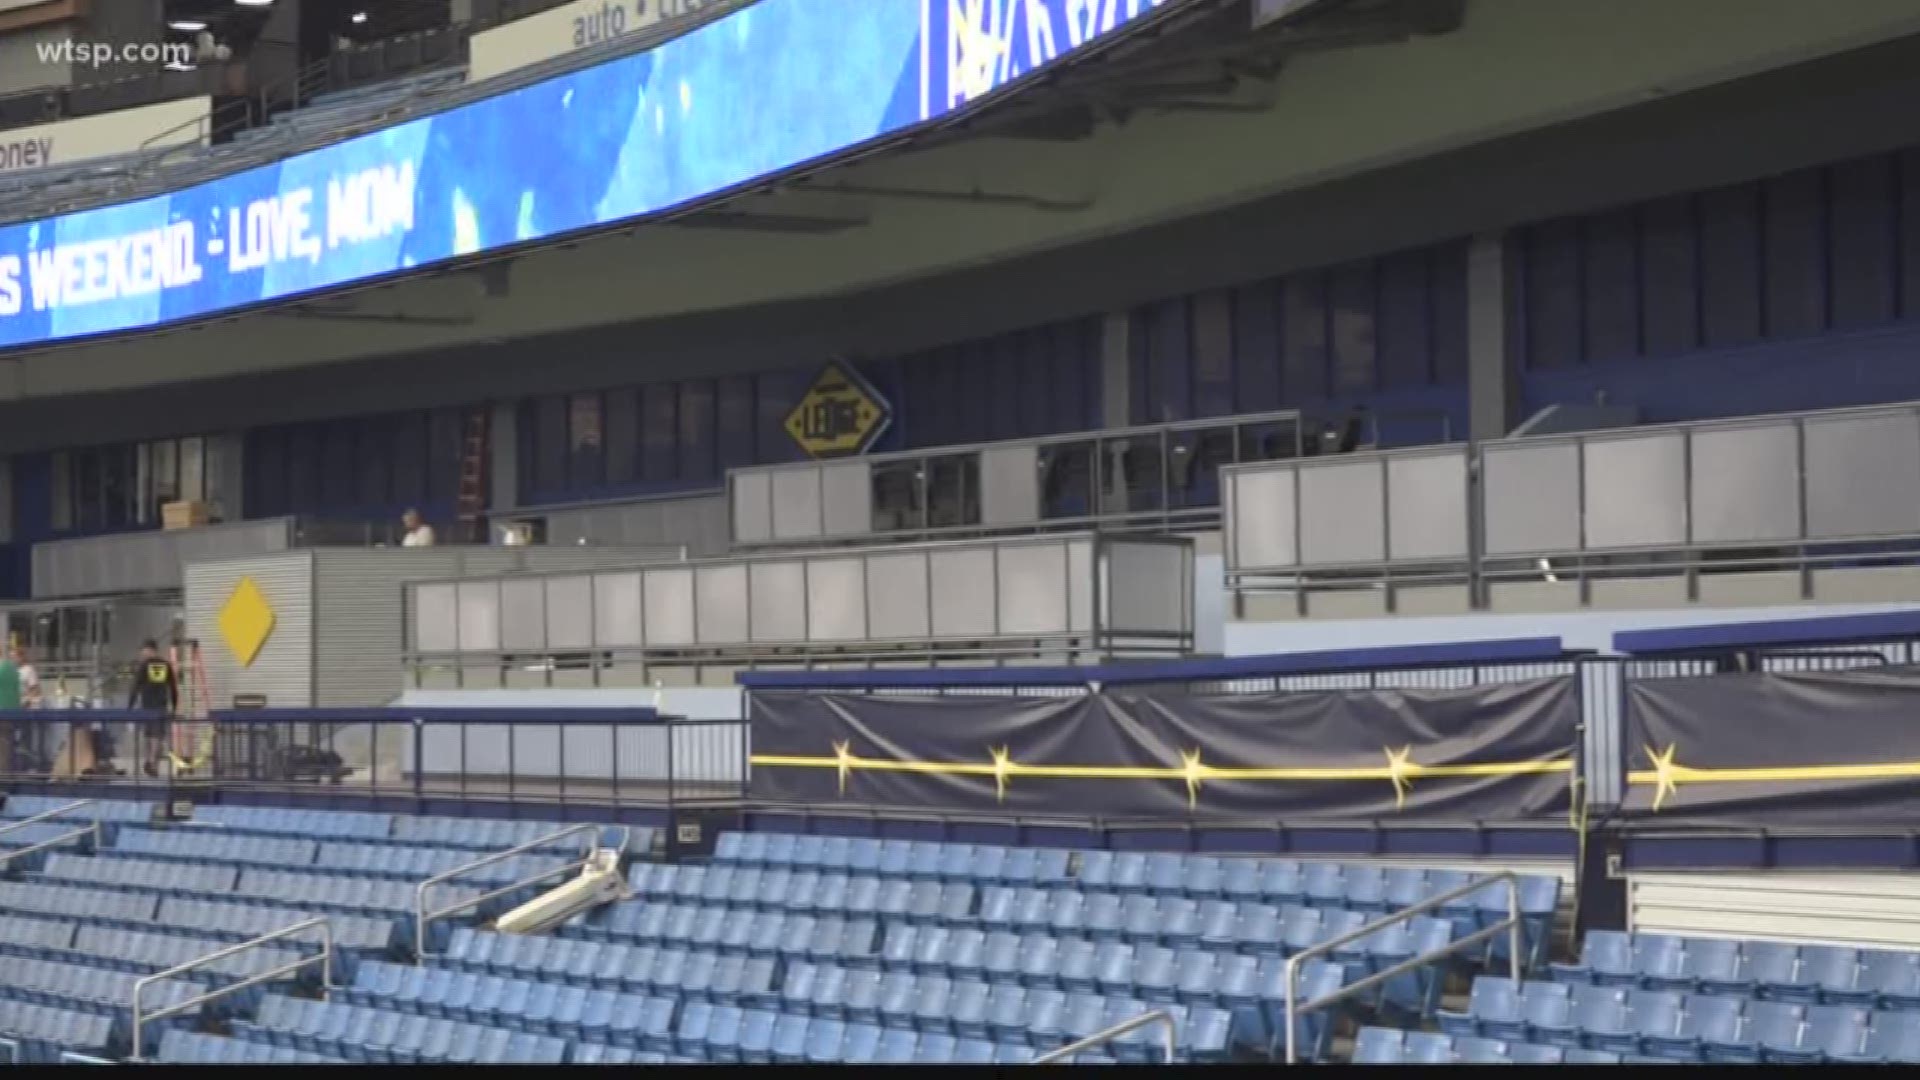 The home of the Tampa Bay Rays also welcomed new entryways, restaurant remodels and a cash-free system.